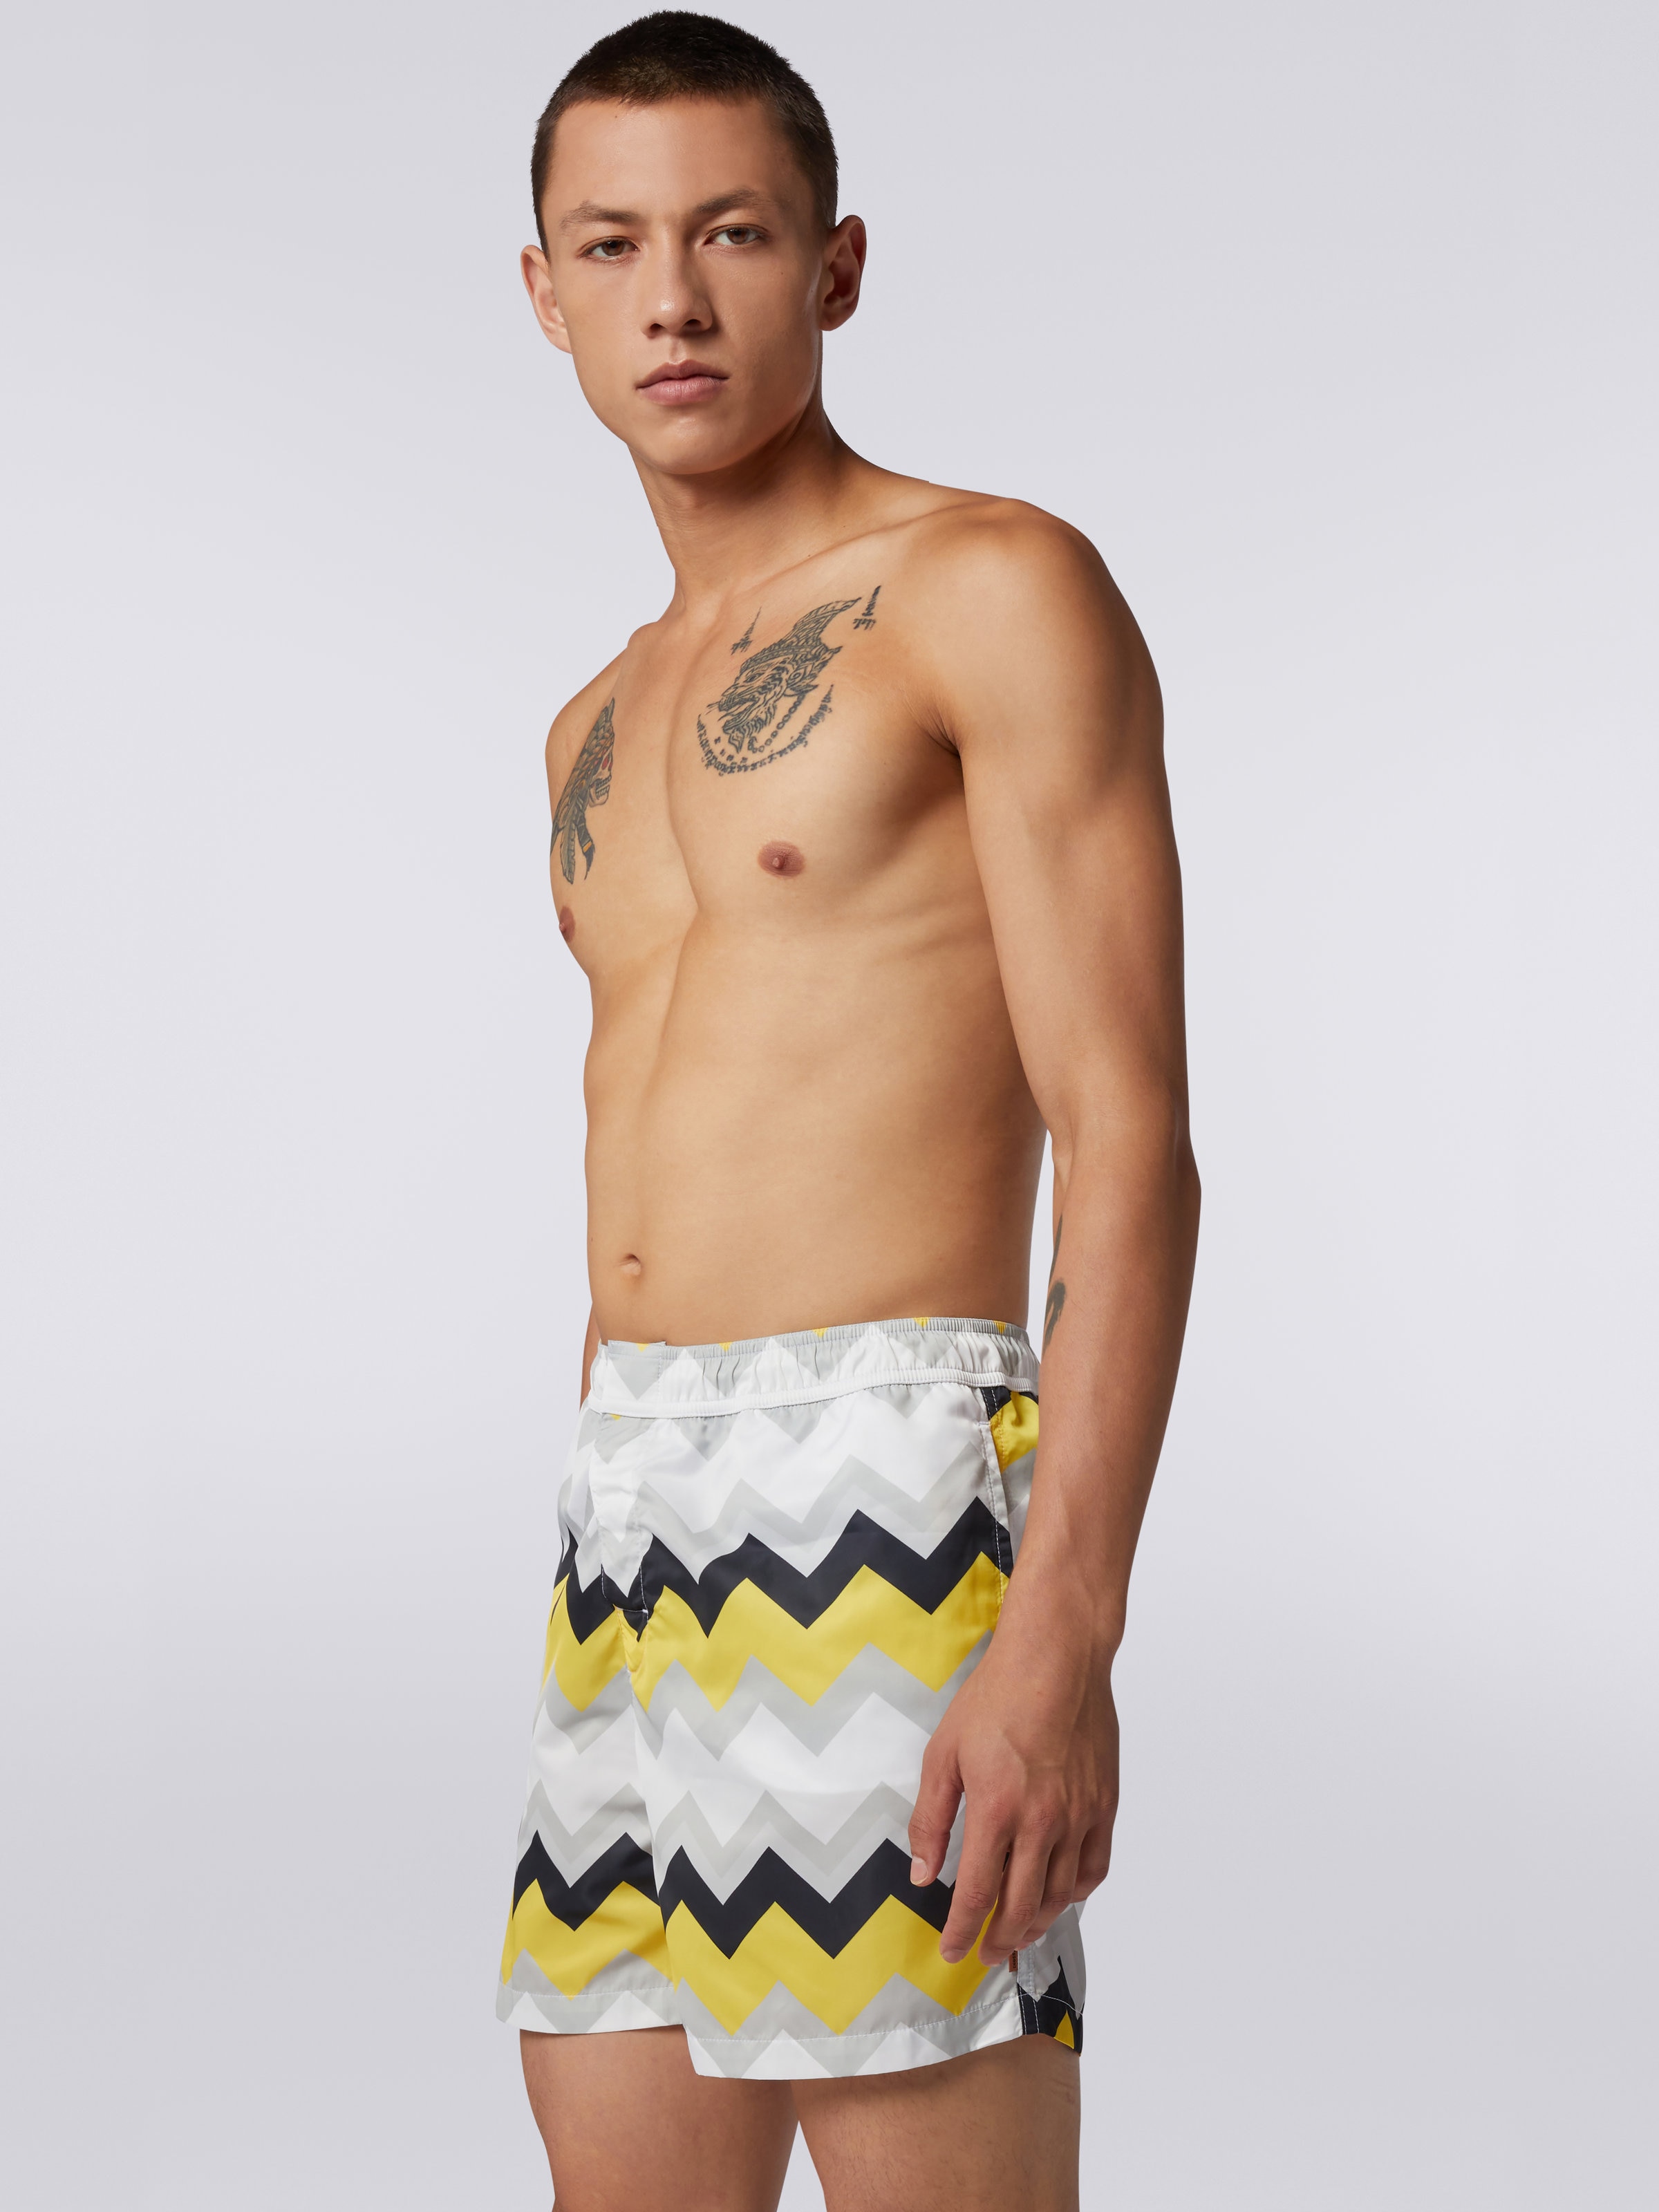 Nylon blend swimming trunks with large zigzag print, White, Yellow & Grey - 2